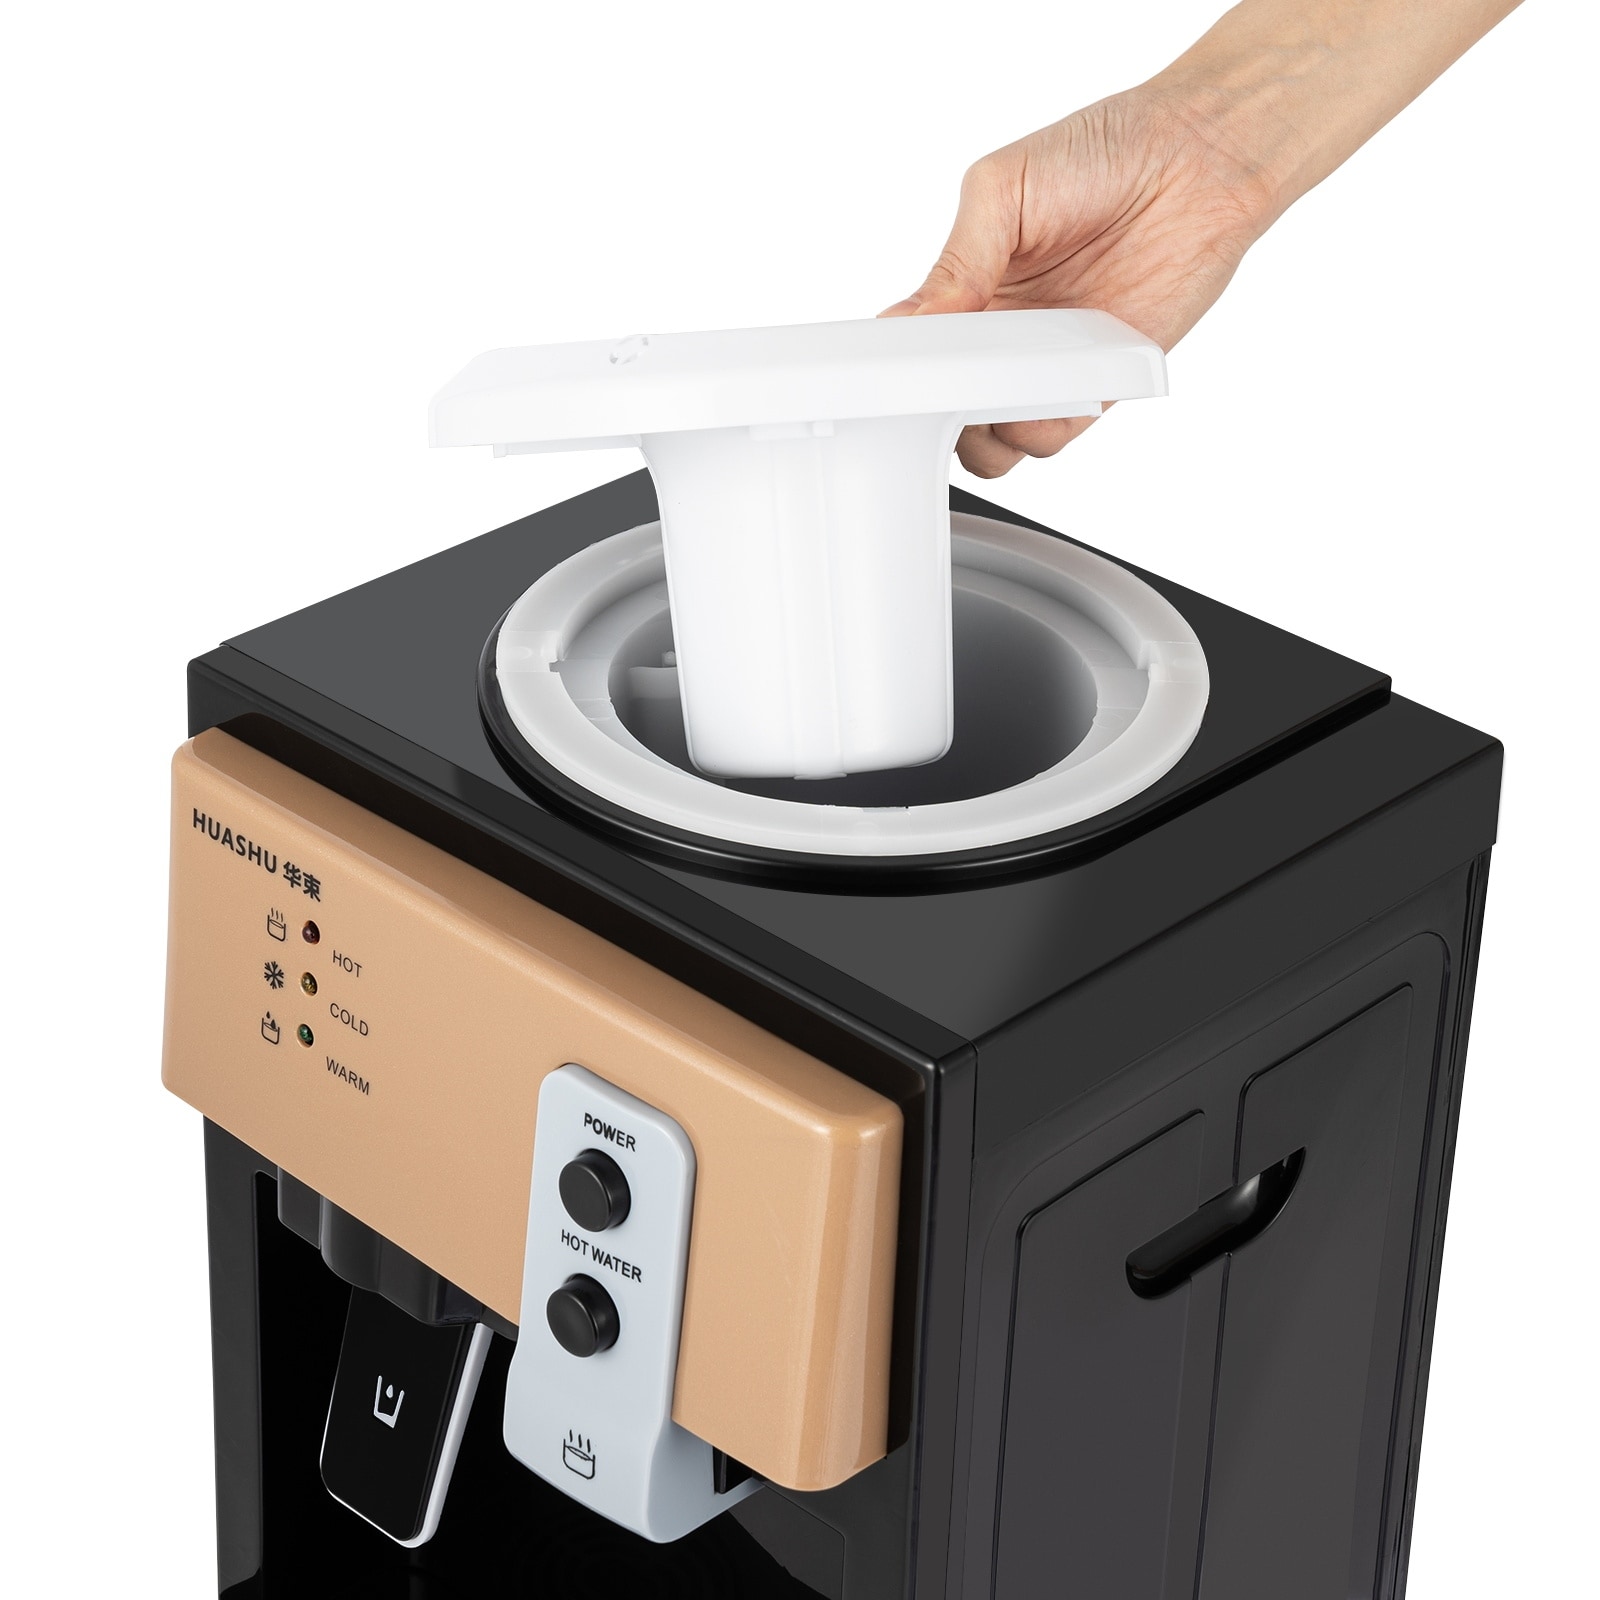 Electric Hot and Cold Water Cooler Dispenser for Home Office Use